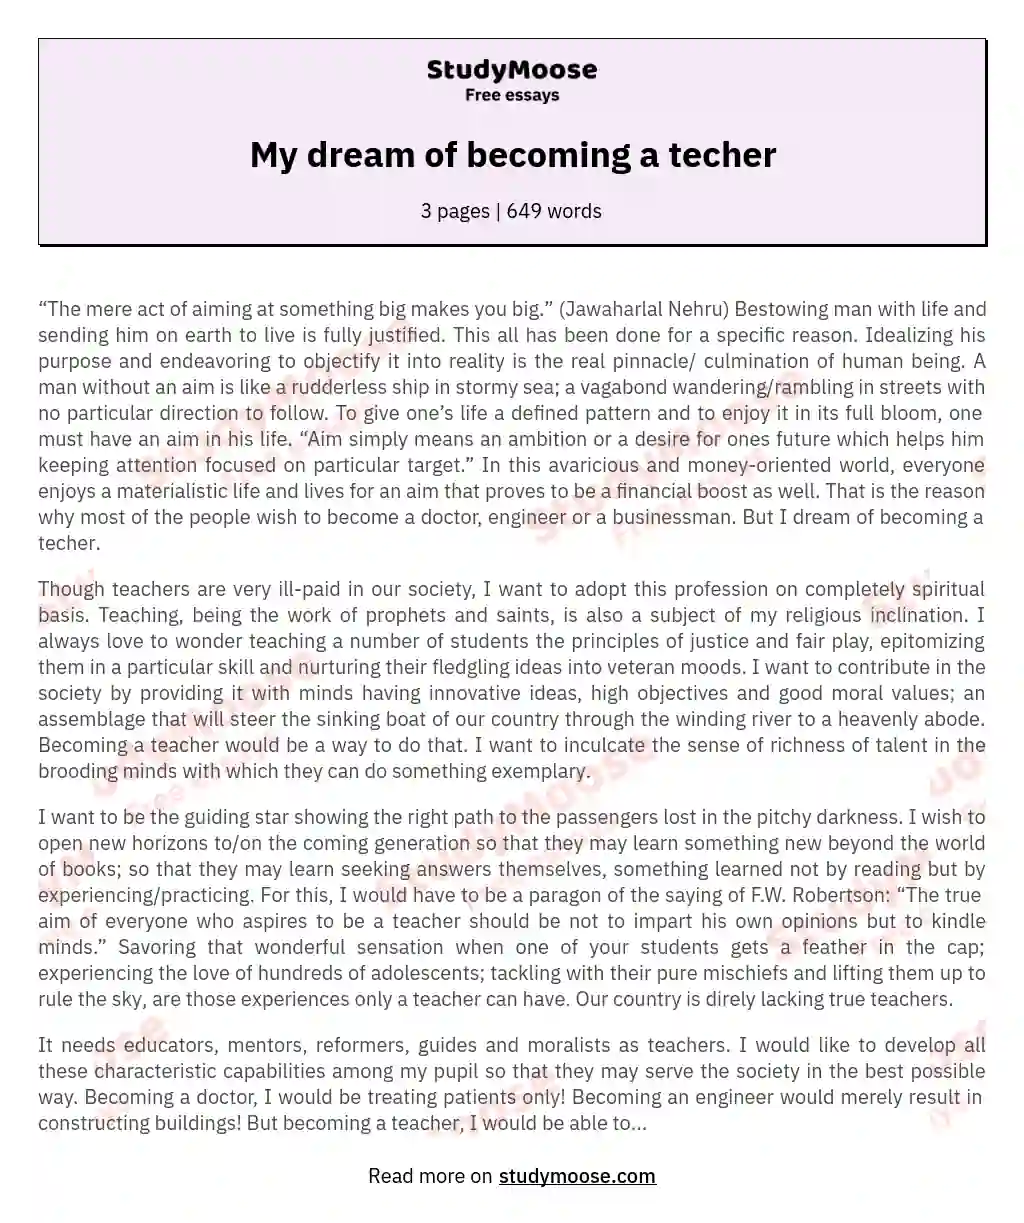 My dream of becoming a techer essay